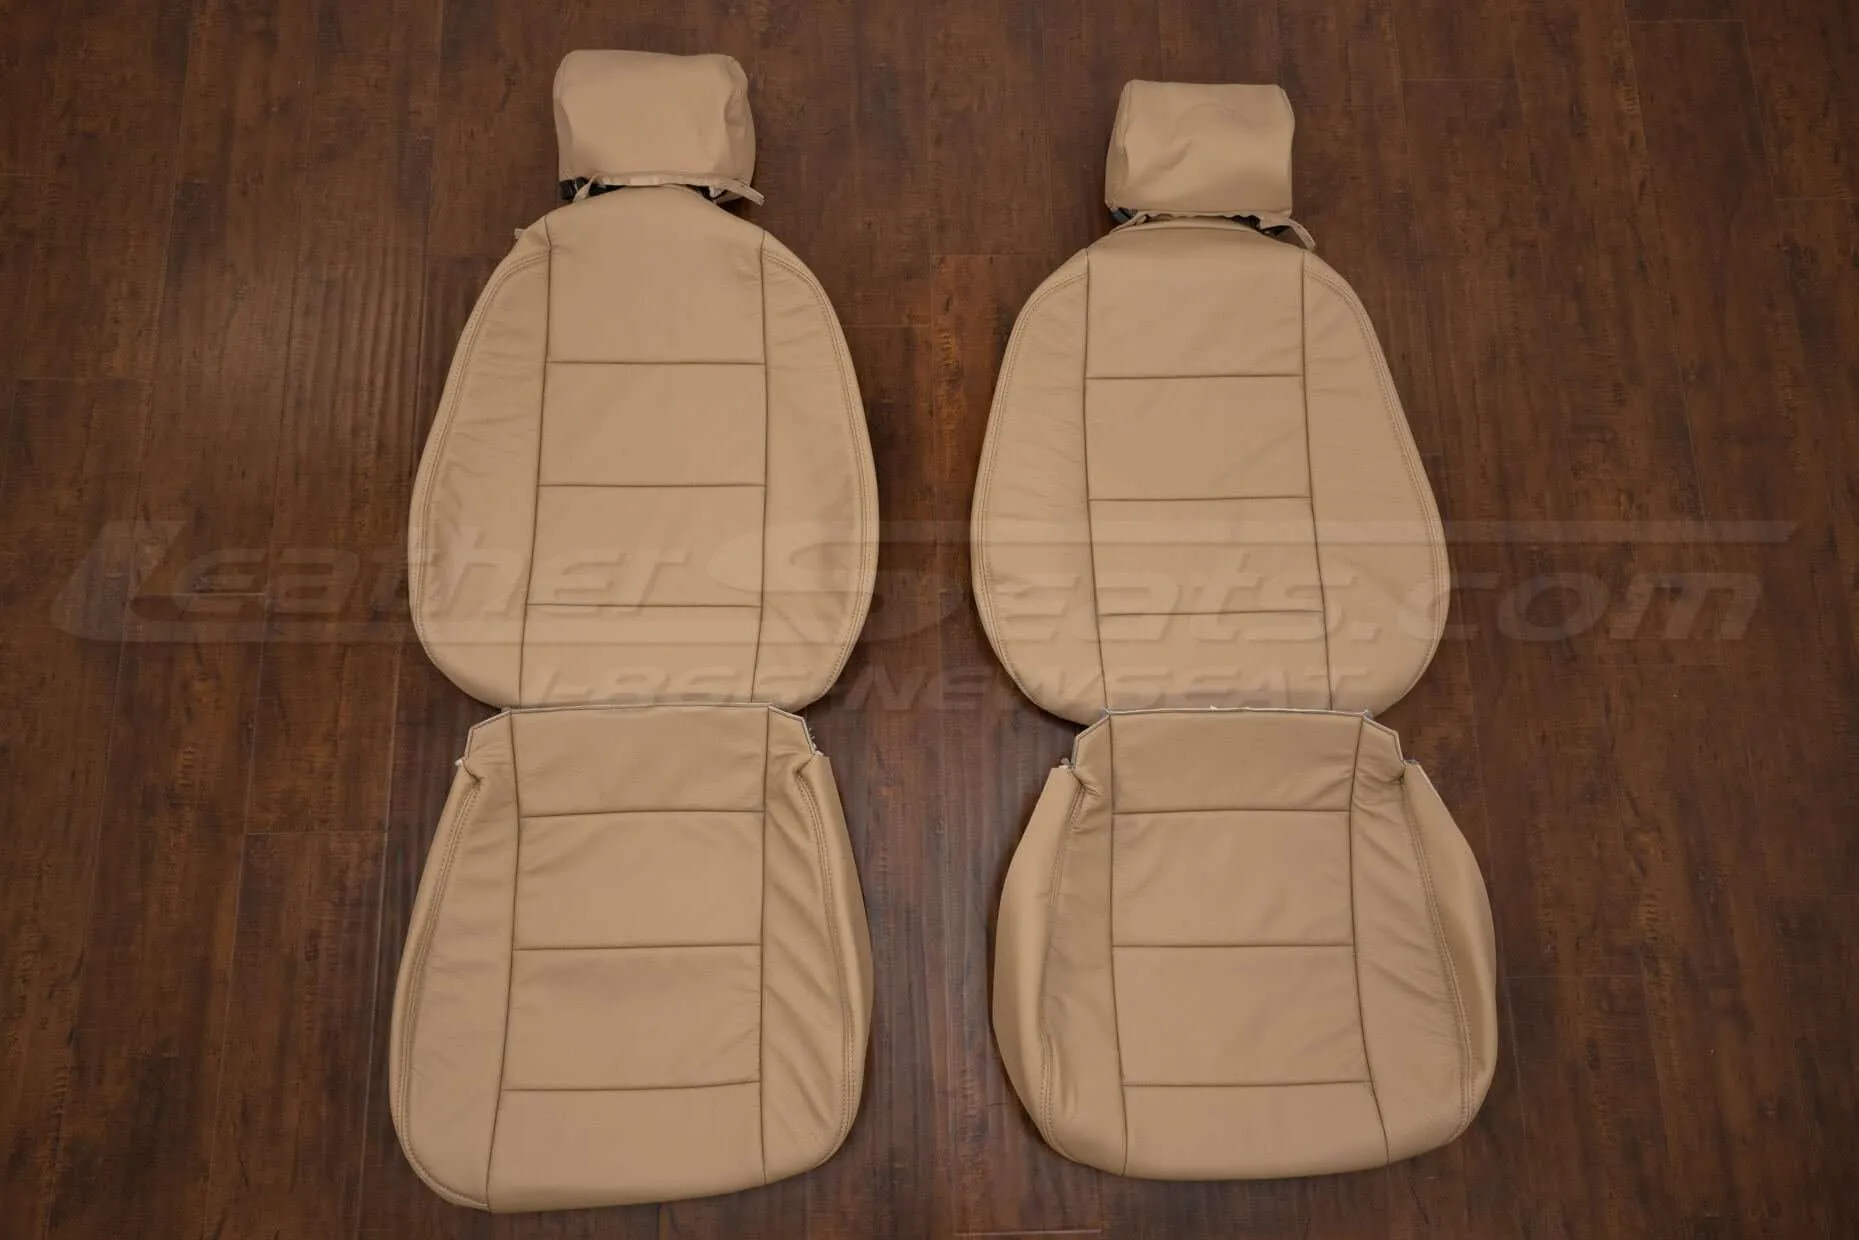 BMW 3 Series Leather Seat Kit - Bisque - Front seat upholstery